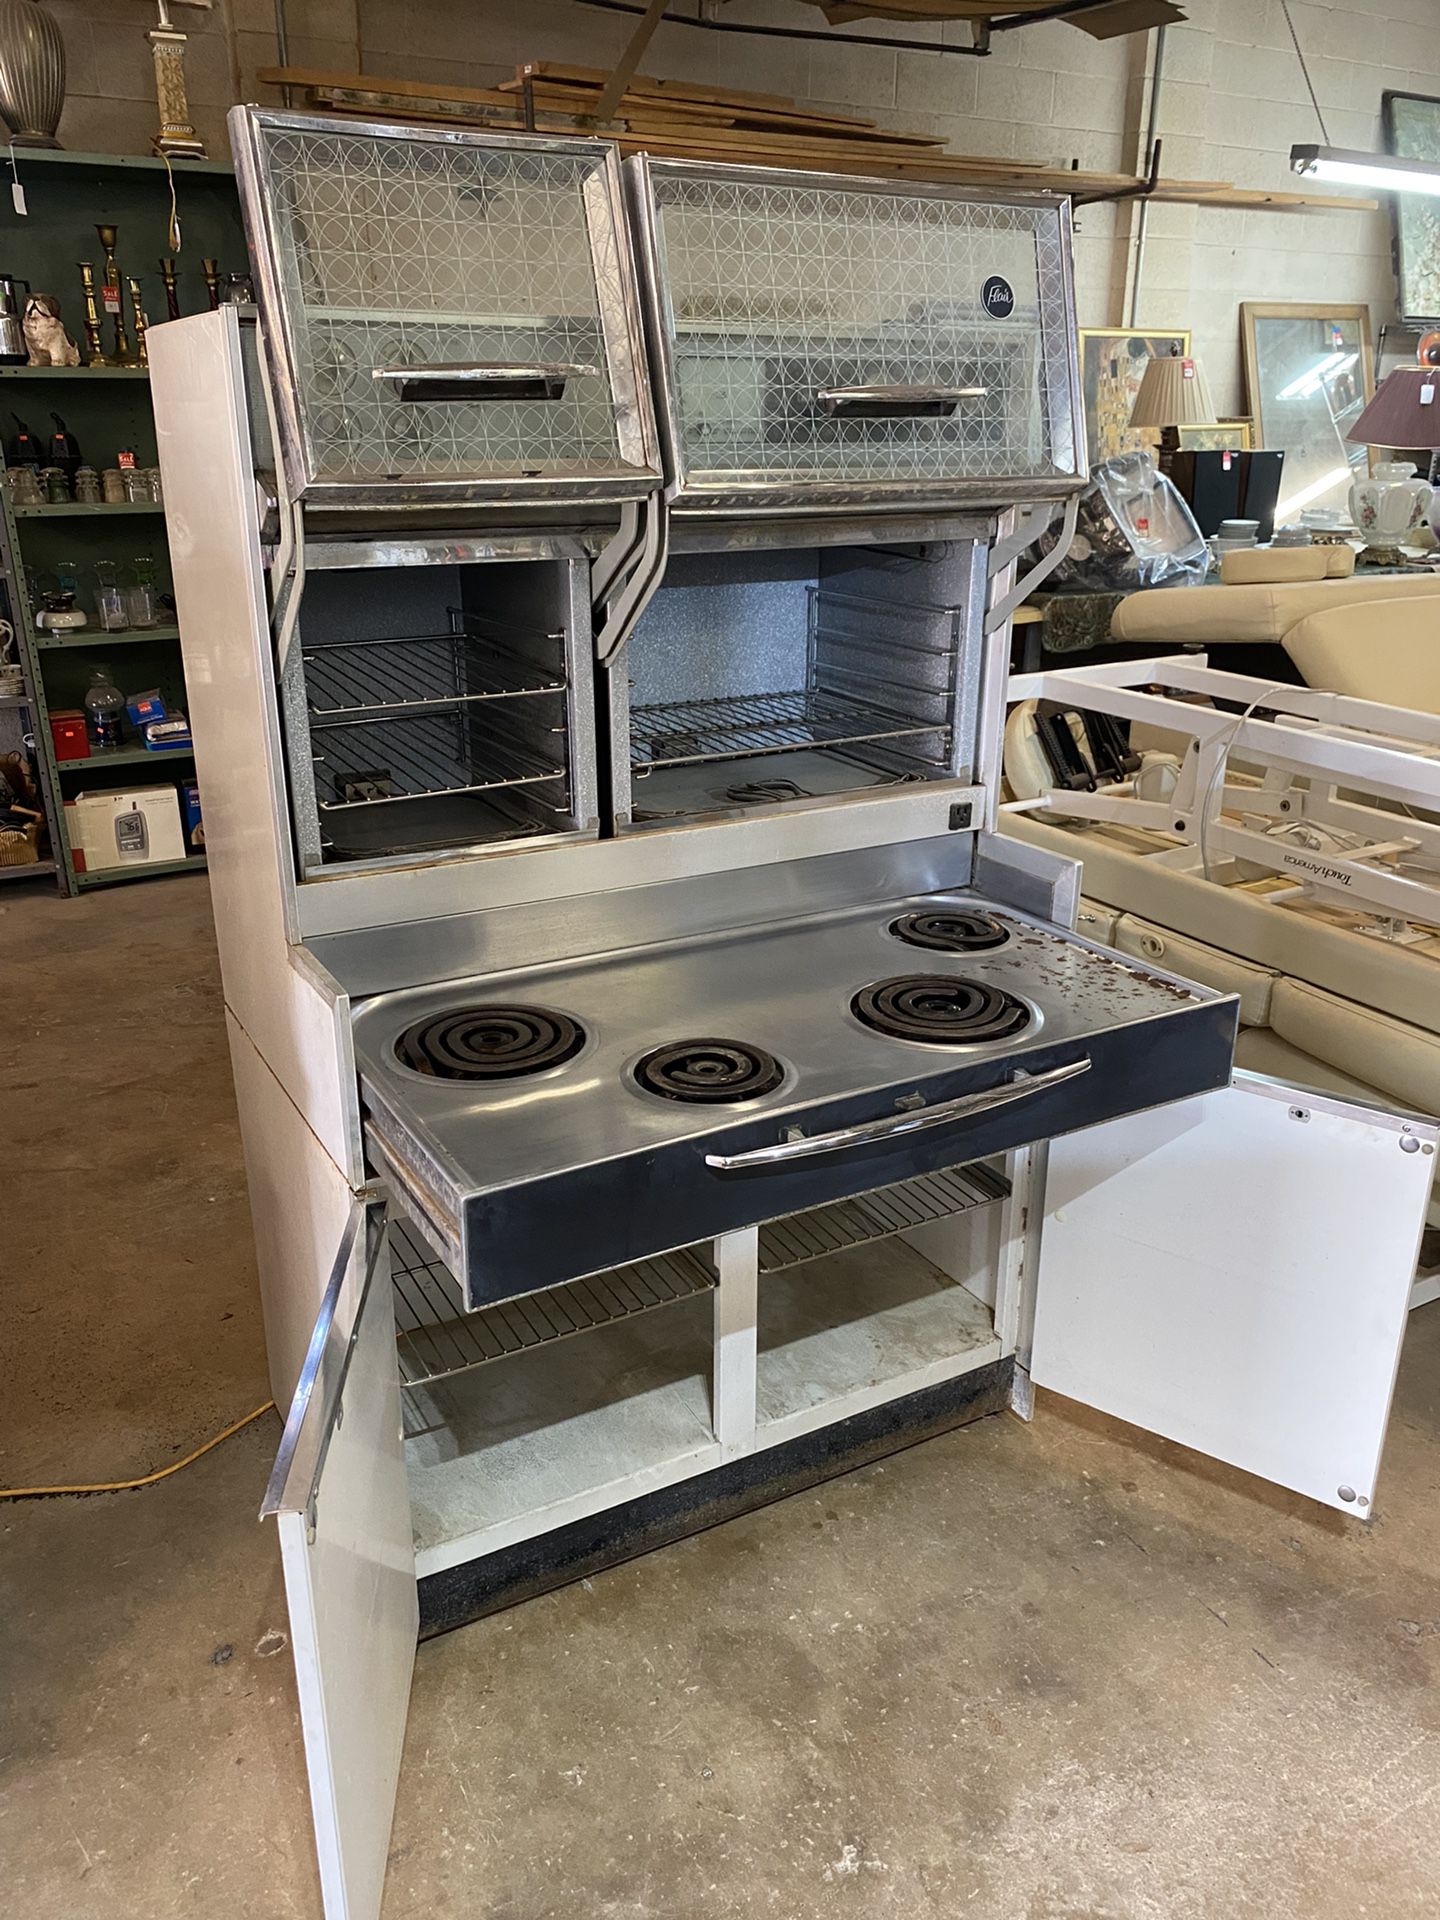 Working Frigidaire Flair Vintage Oven Stove 